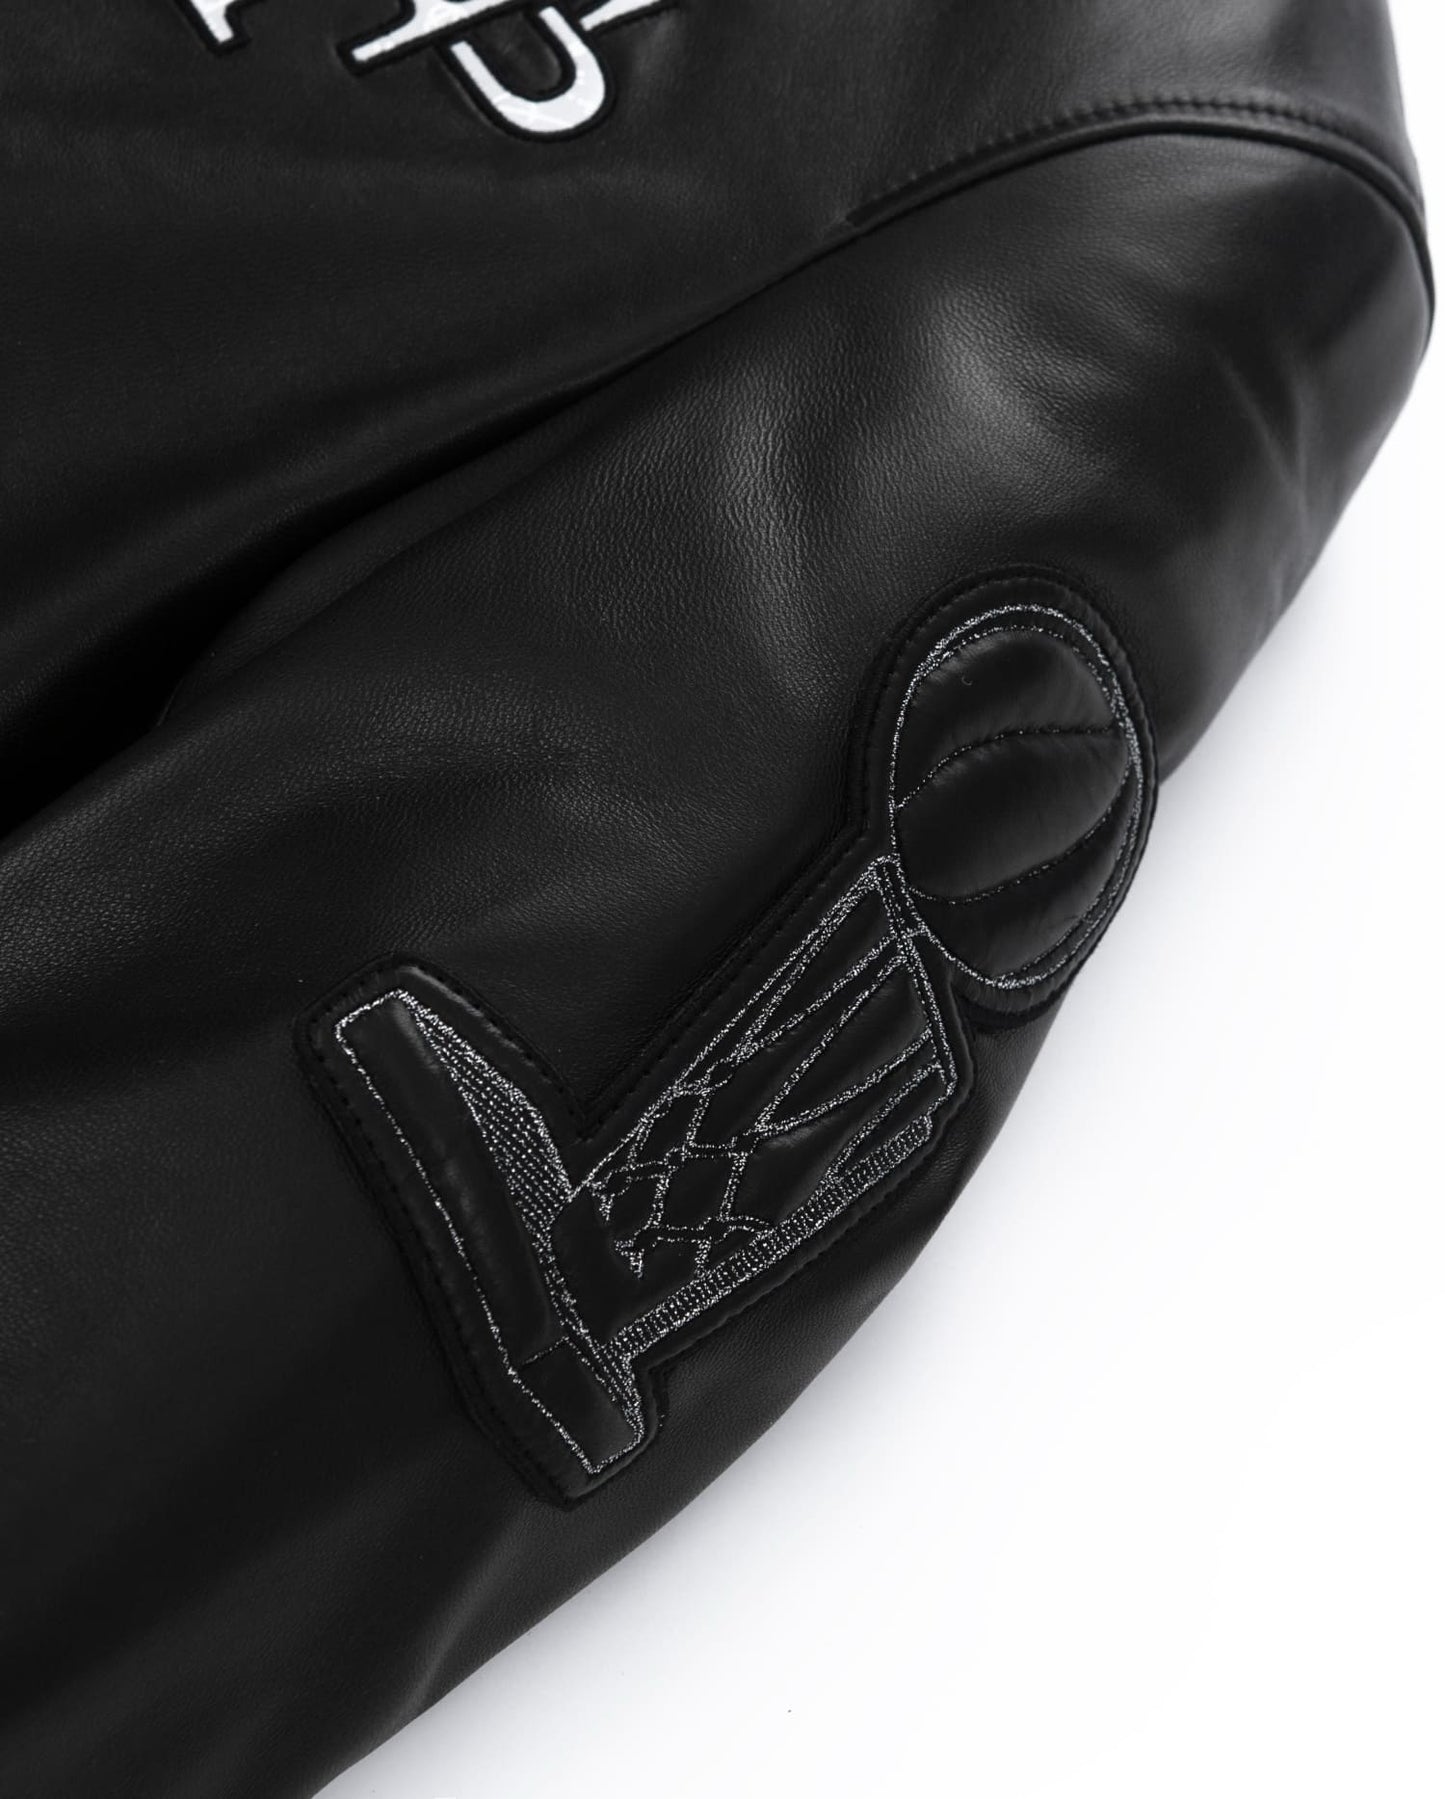 Black 3D Embroidery Patched Lambskin Moto Biker Leather Jacket